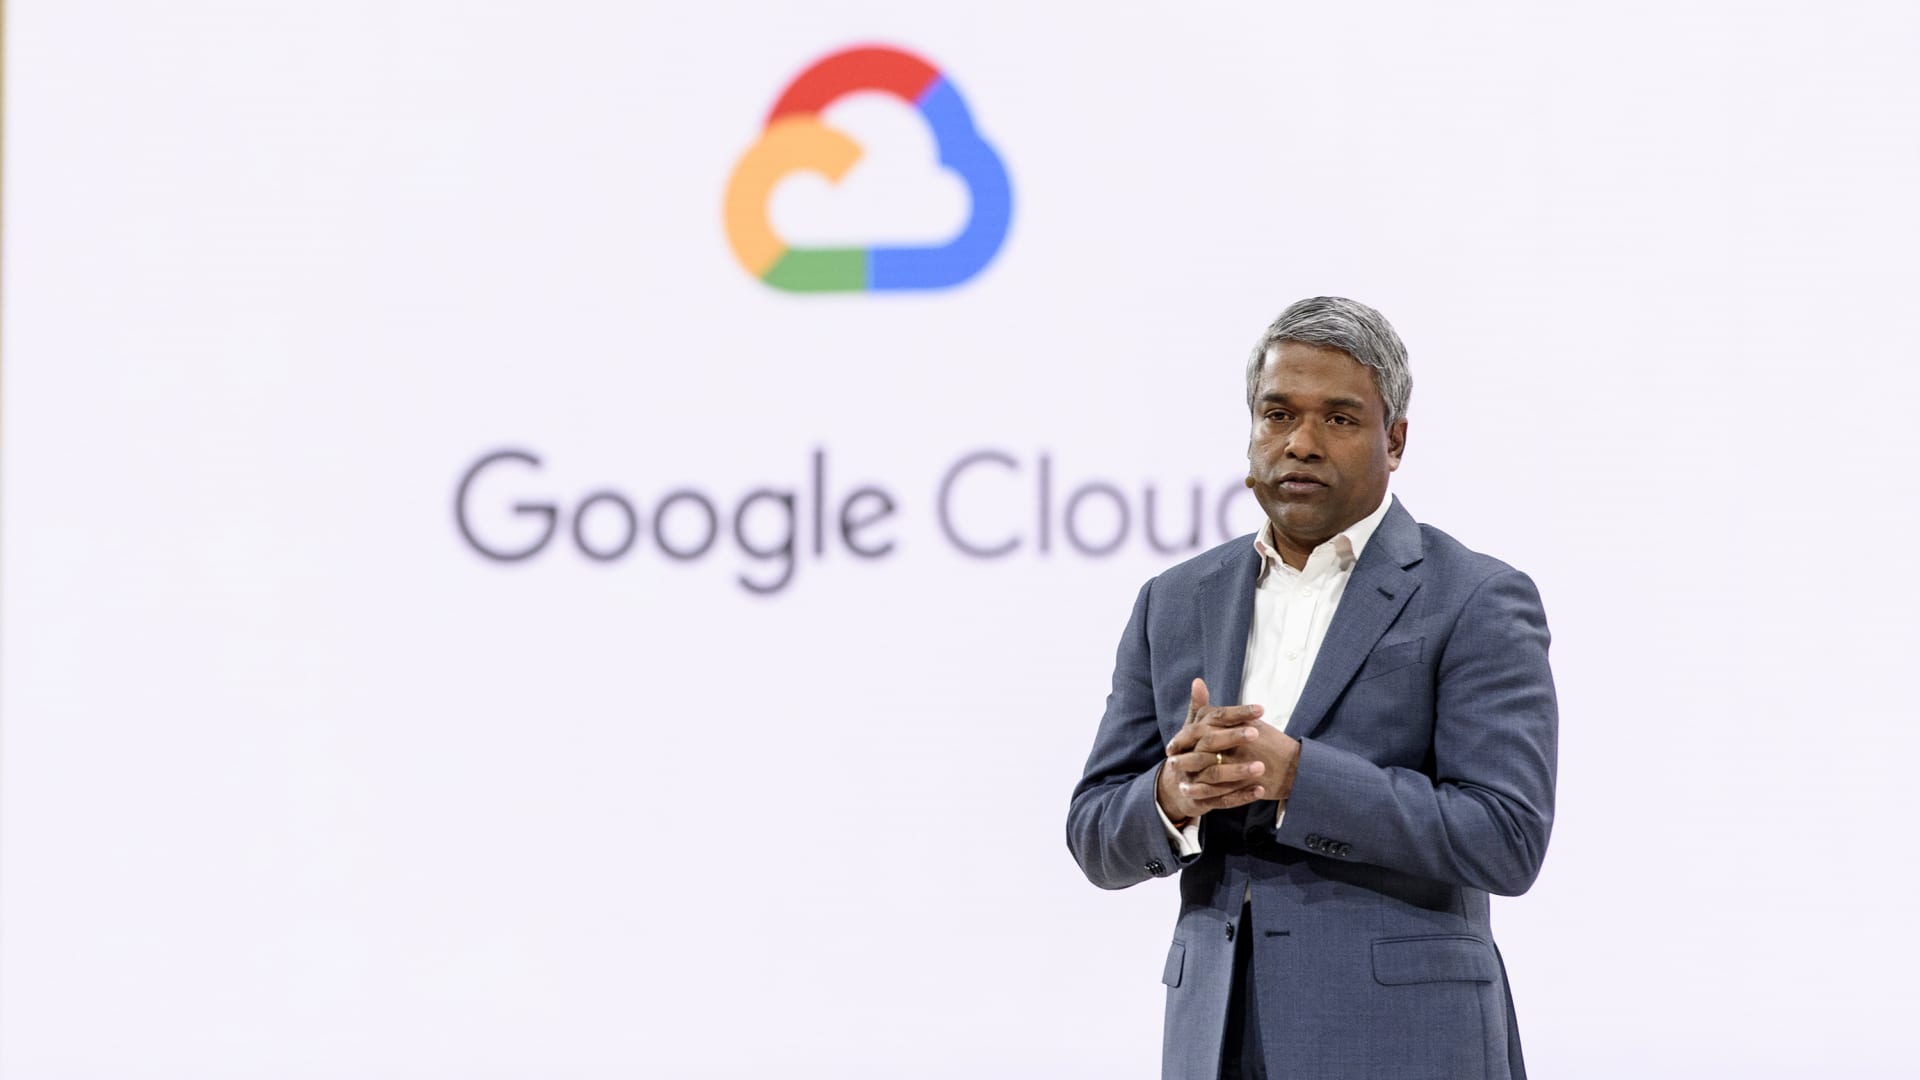 Thomas Kurian, chief executive officer of cloud services at Google LLC, speaks during the Google Cloud Next '19 event in San Francisco, California, U.S., on Tuesday, April 9, 2019. The conference brings together industry experts to discuss the future of cloud computing.